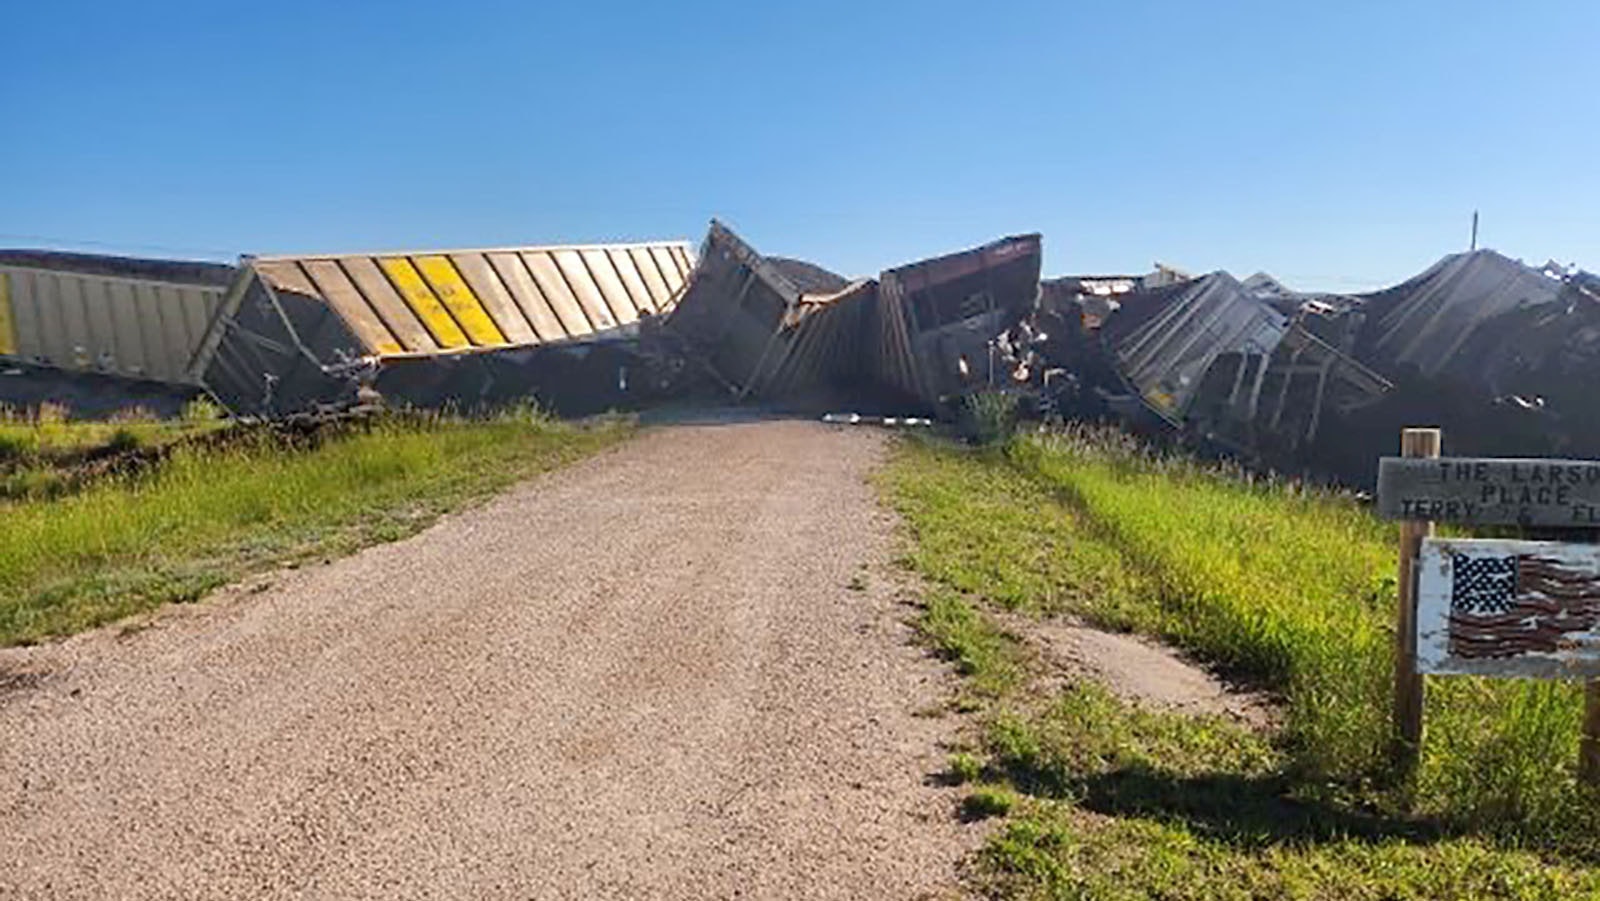 More than 20 rail cars carrying Wyoming coal derailed Monday morning near Lusk.